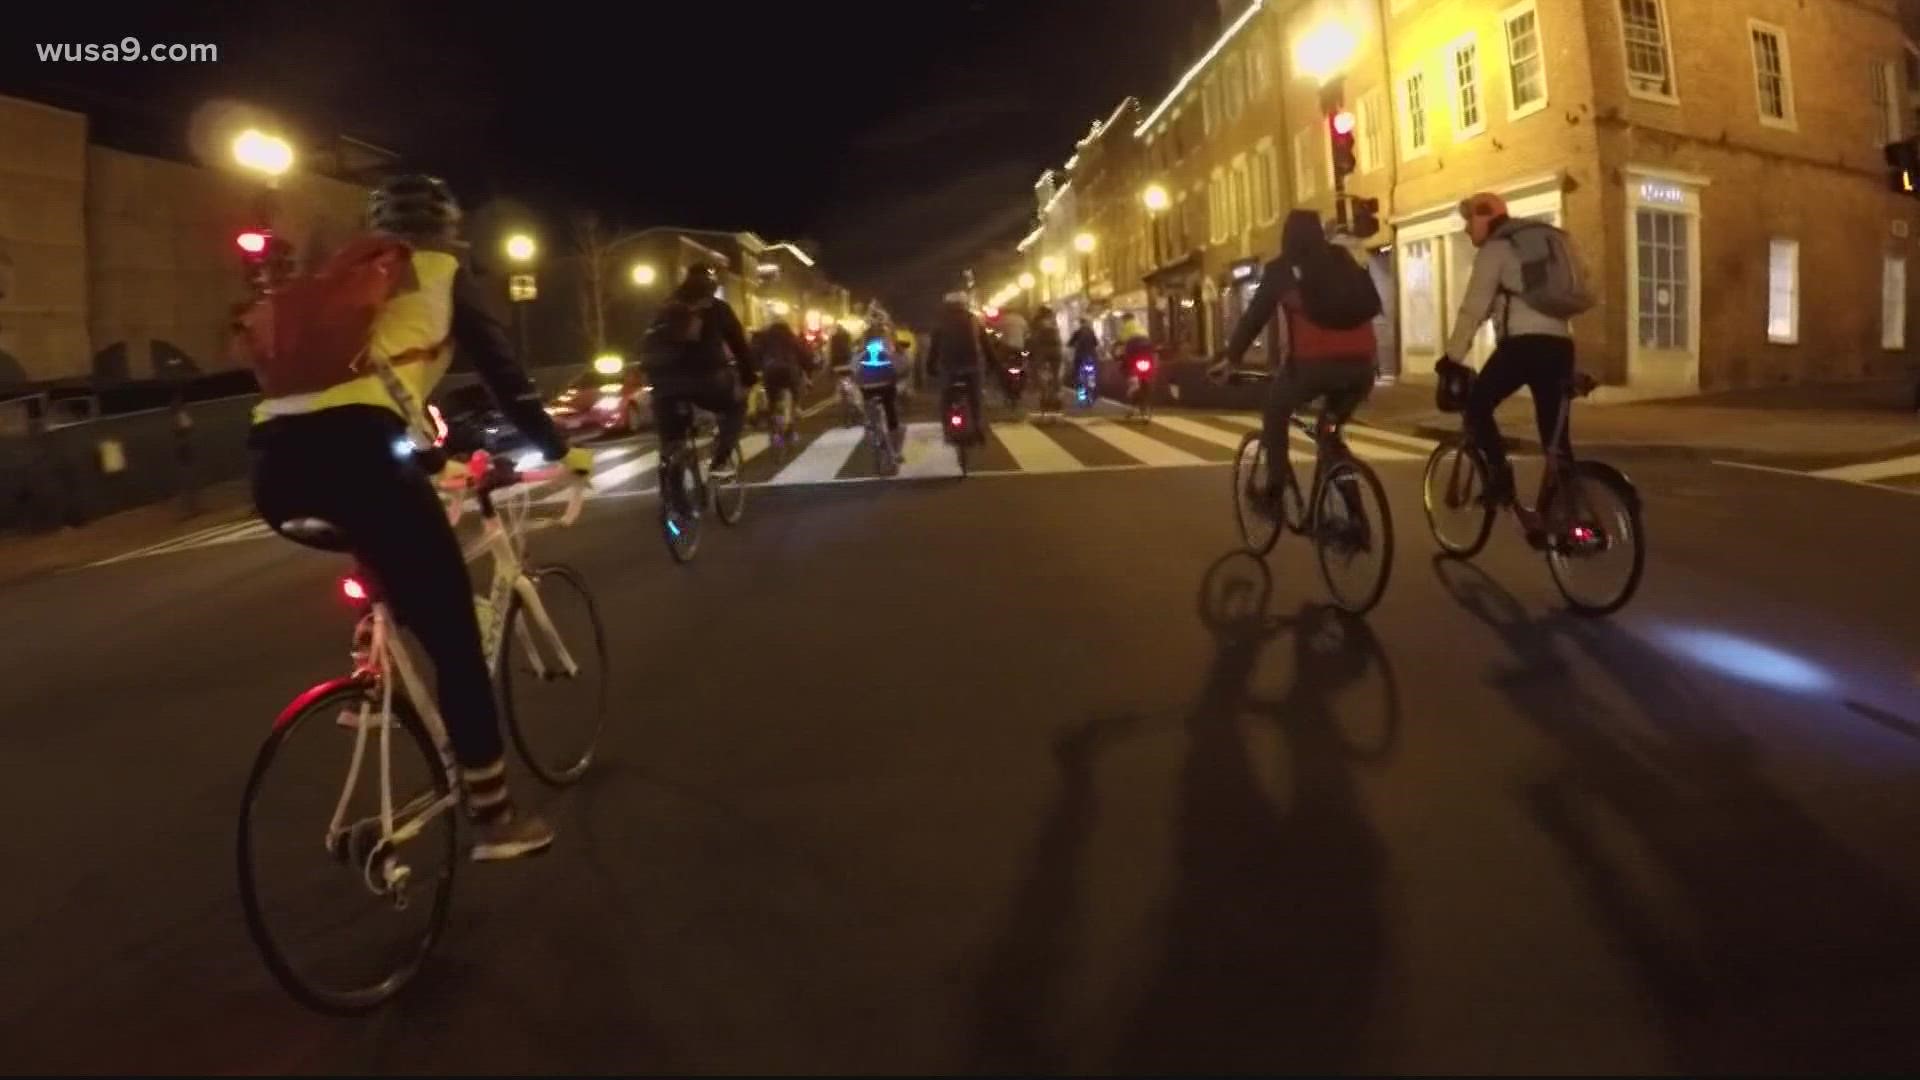 This is the story of the DC bike party.